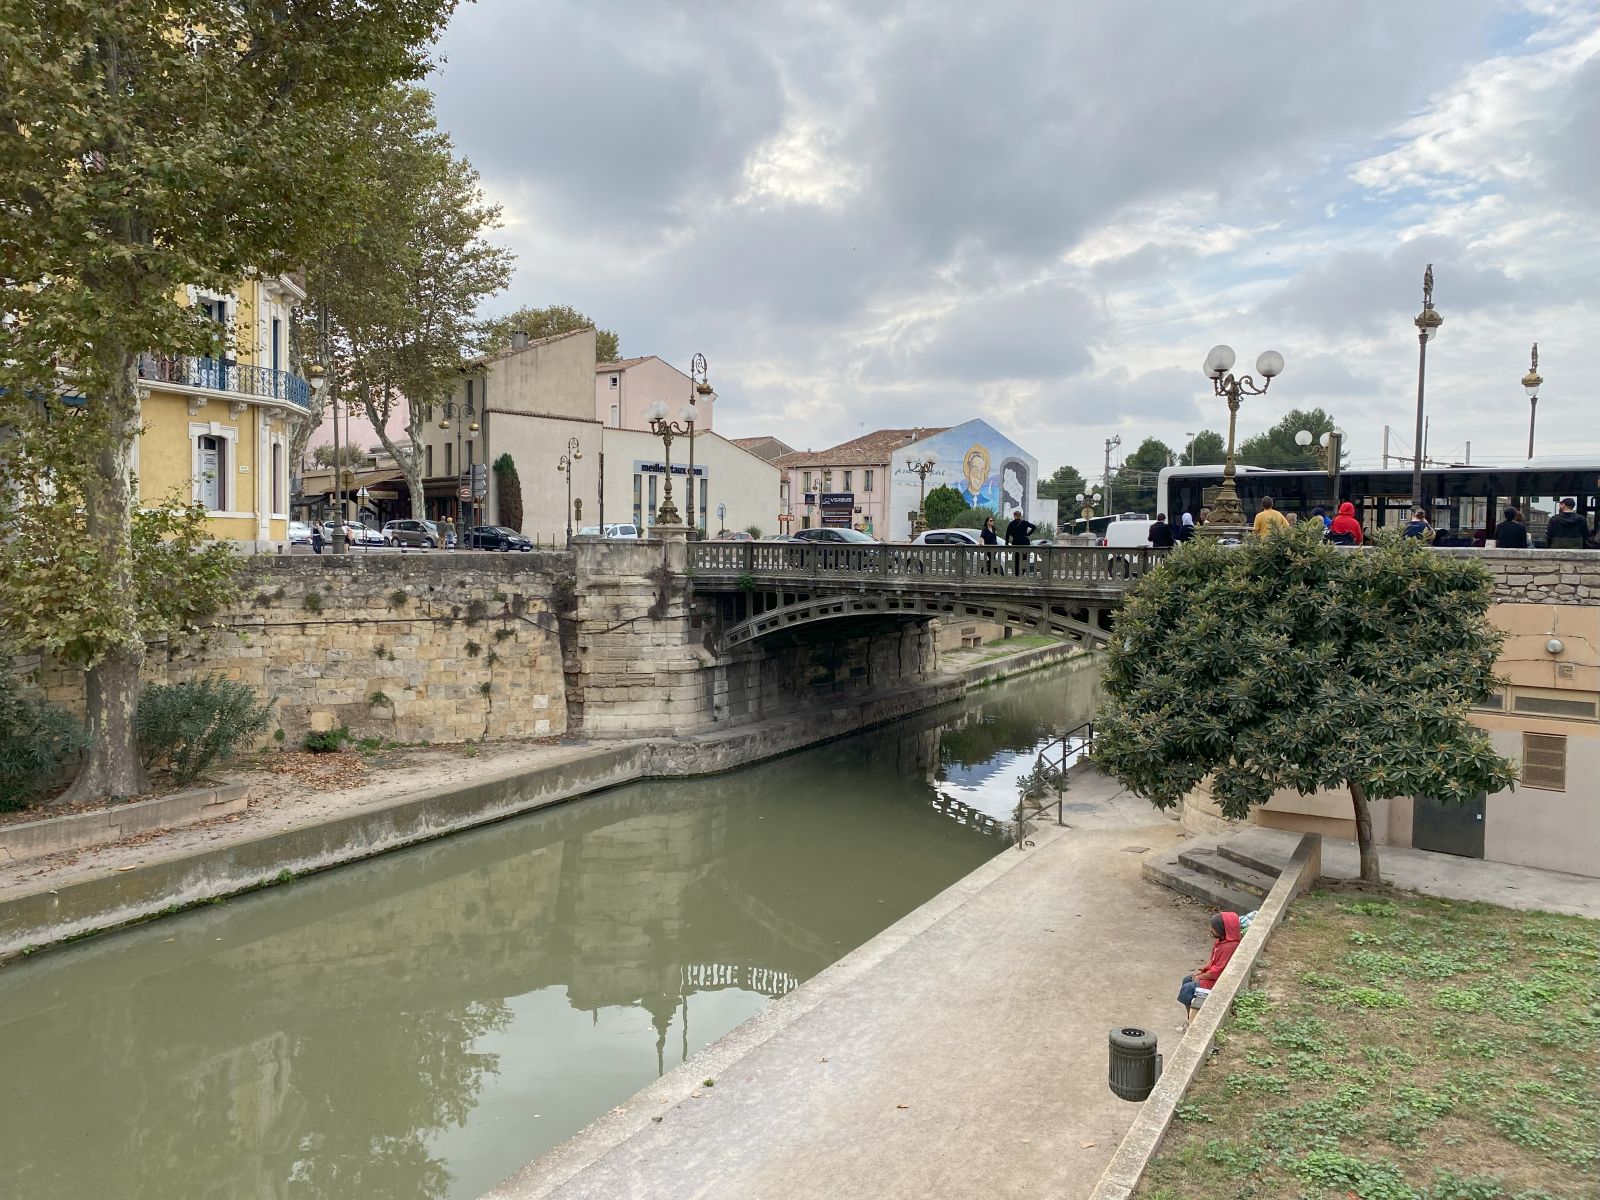 Exploring Roman history in Narbonne, France